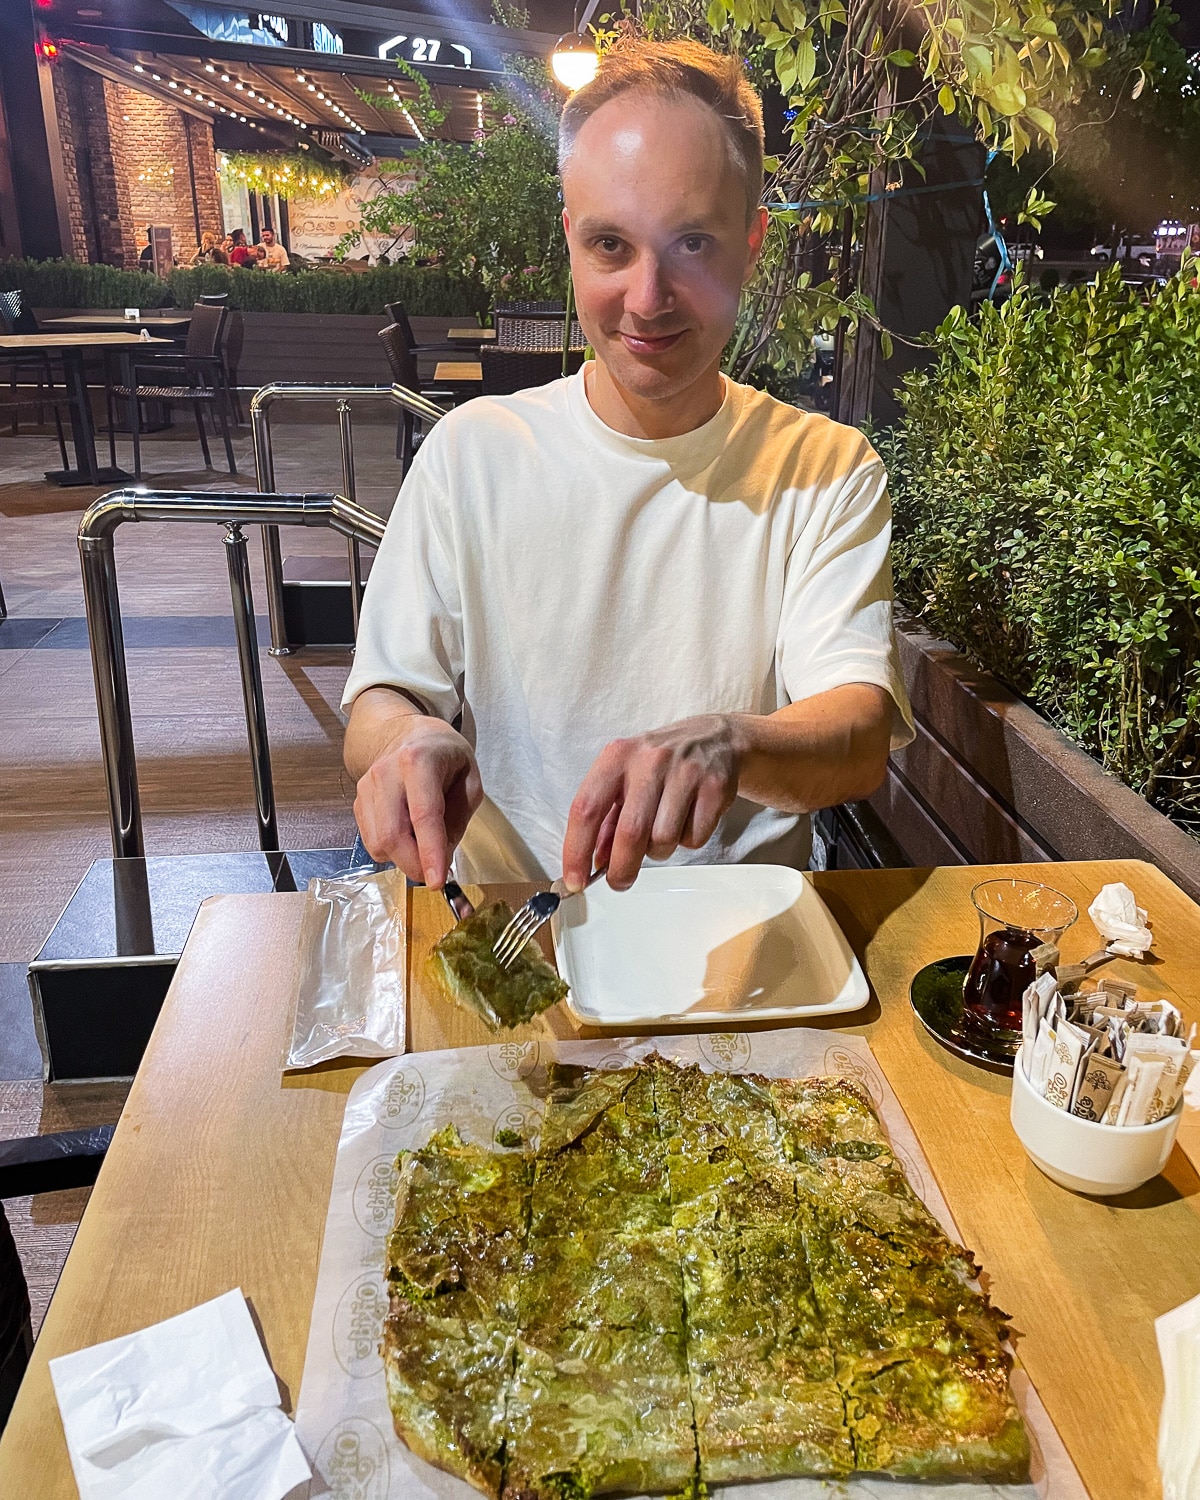 A huge katmer on a cafe table in Gaziantep, with Vidar about to tuck in. The katmer is large and completely green from all the pistachios it's stuffed with.